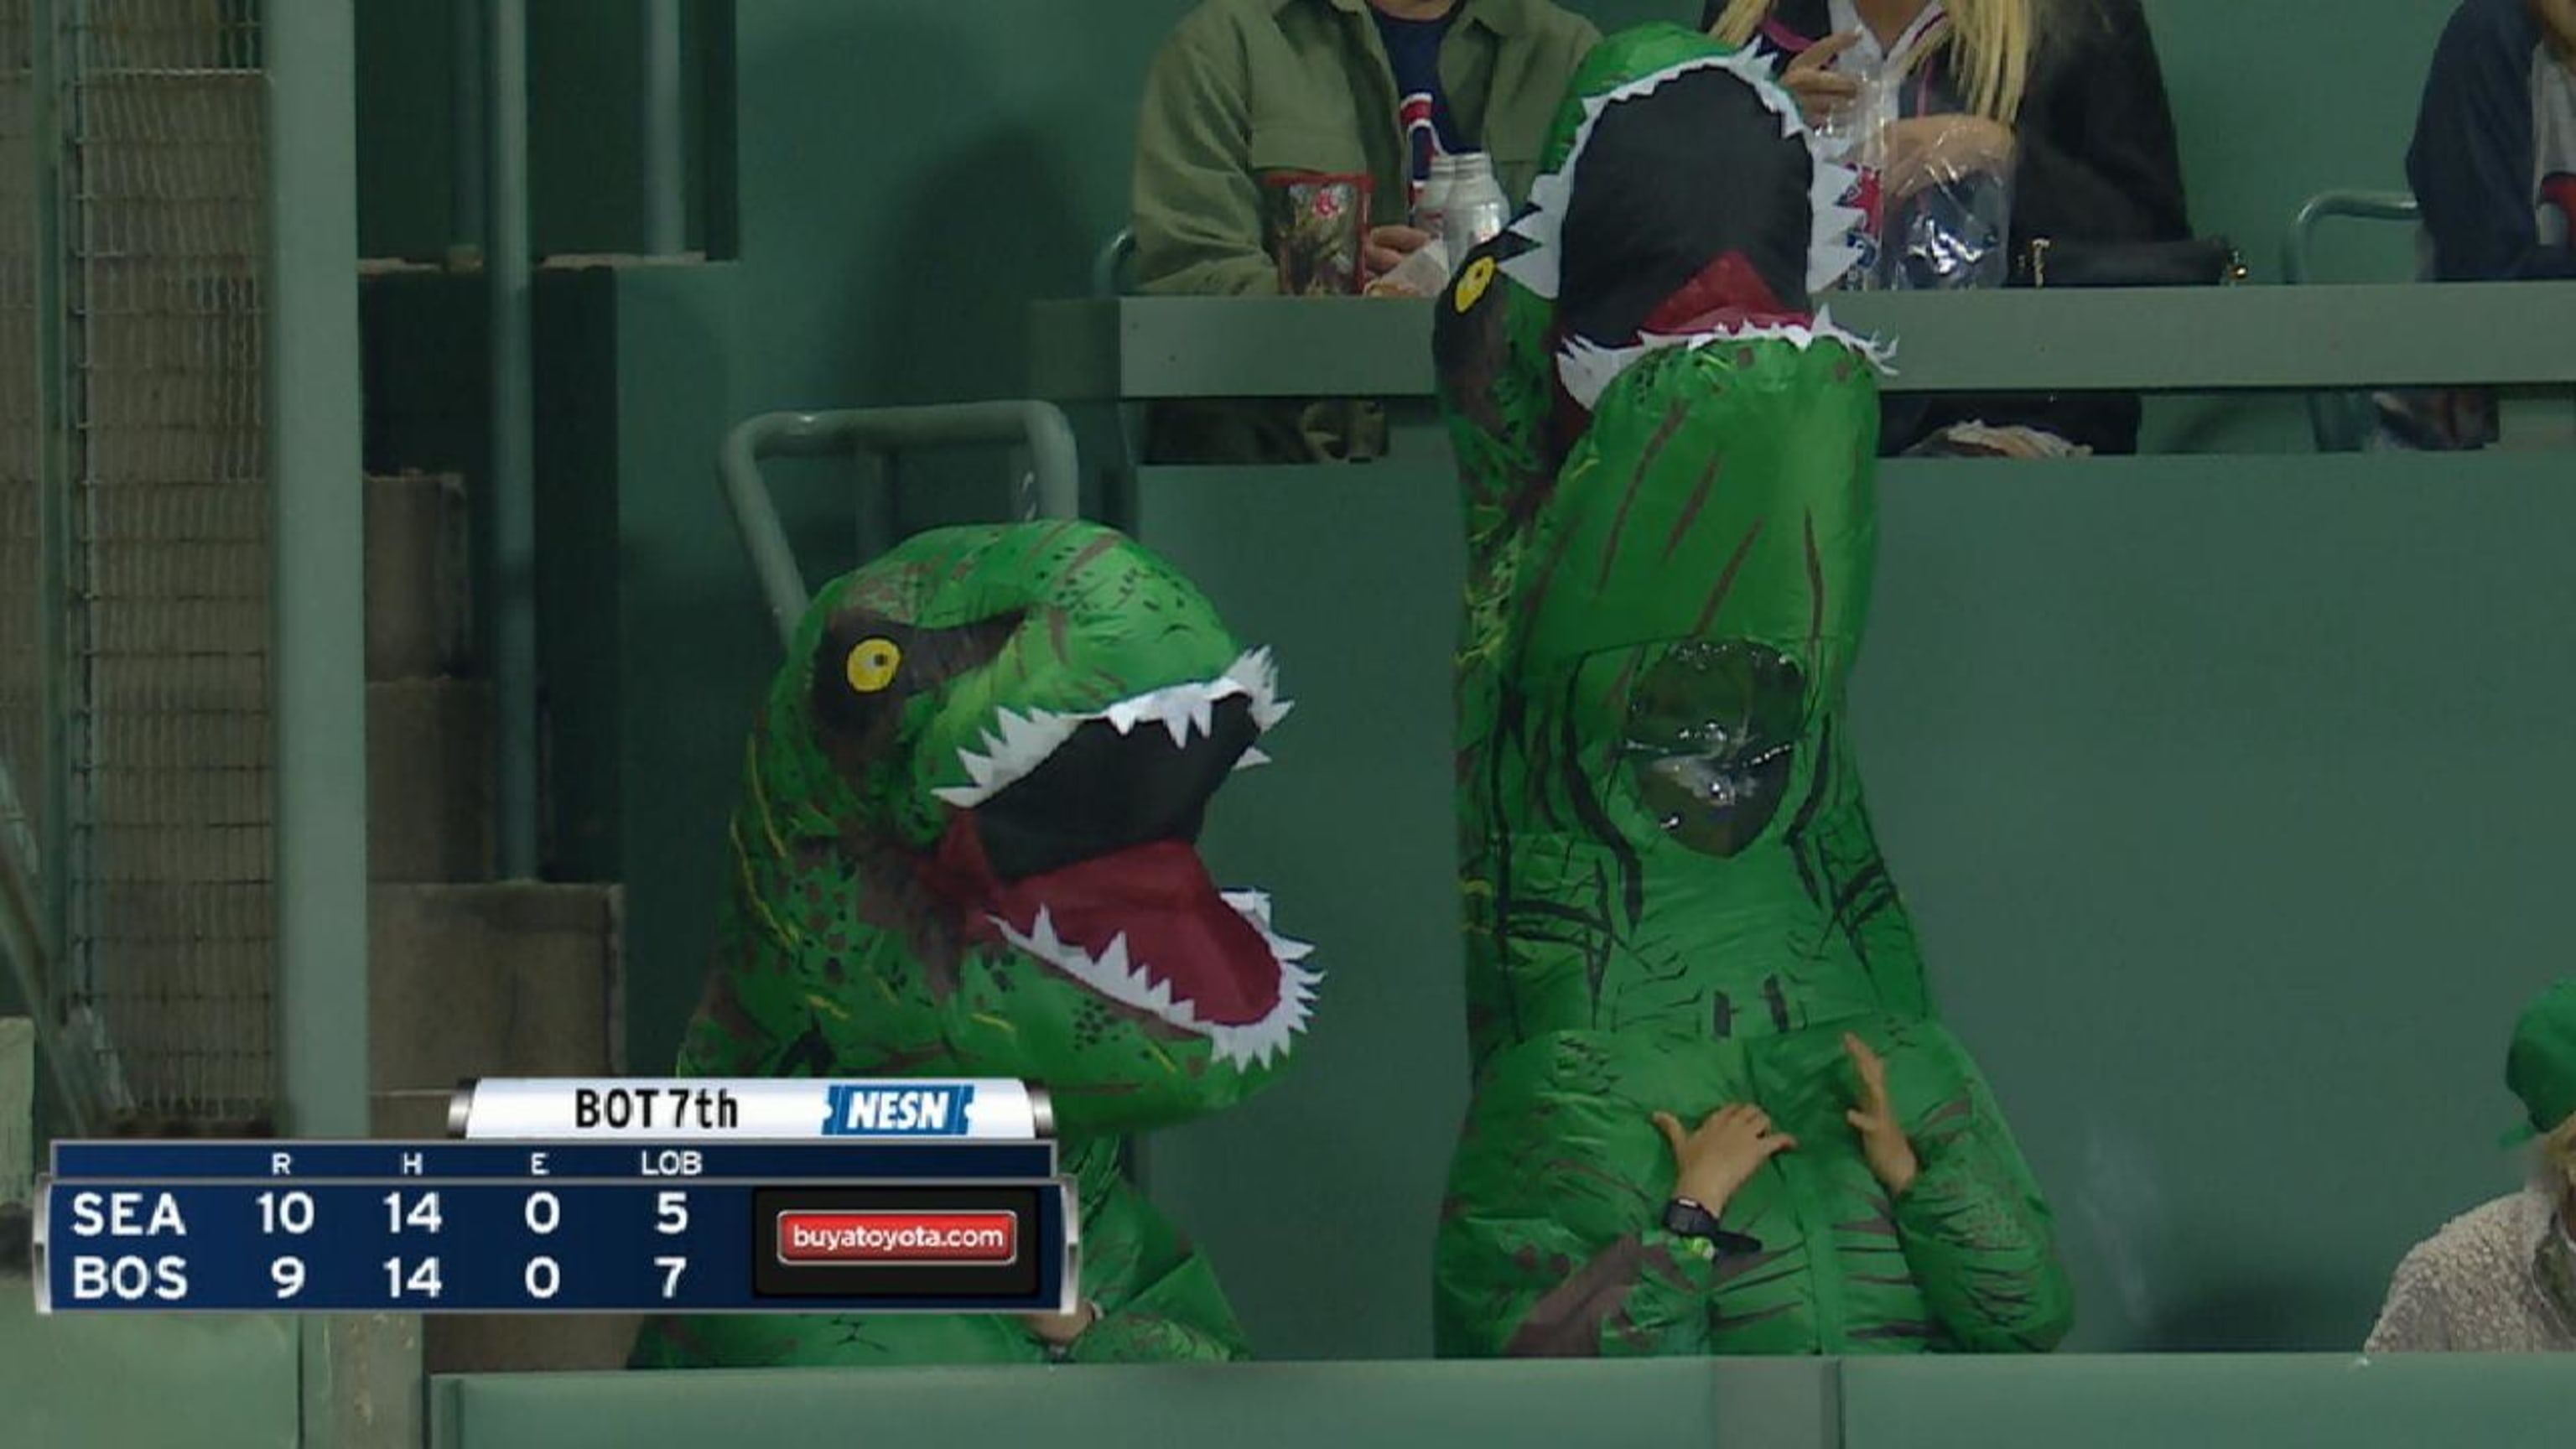 What if the Red Sox had a Green Monster uniform 🤔🟢